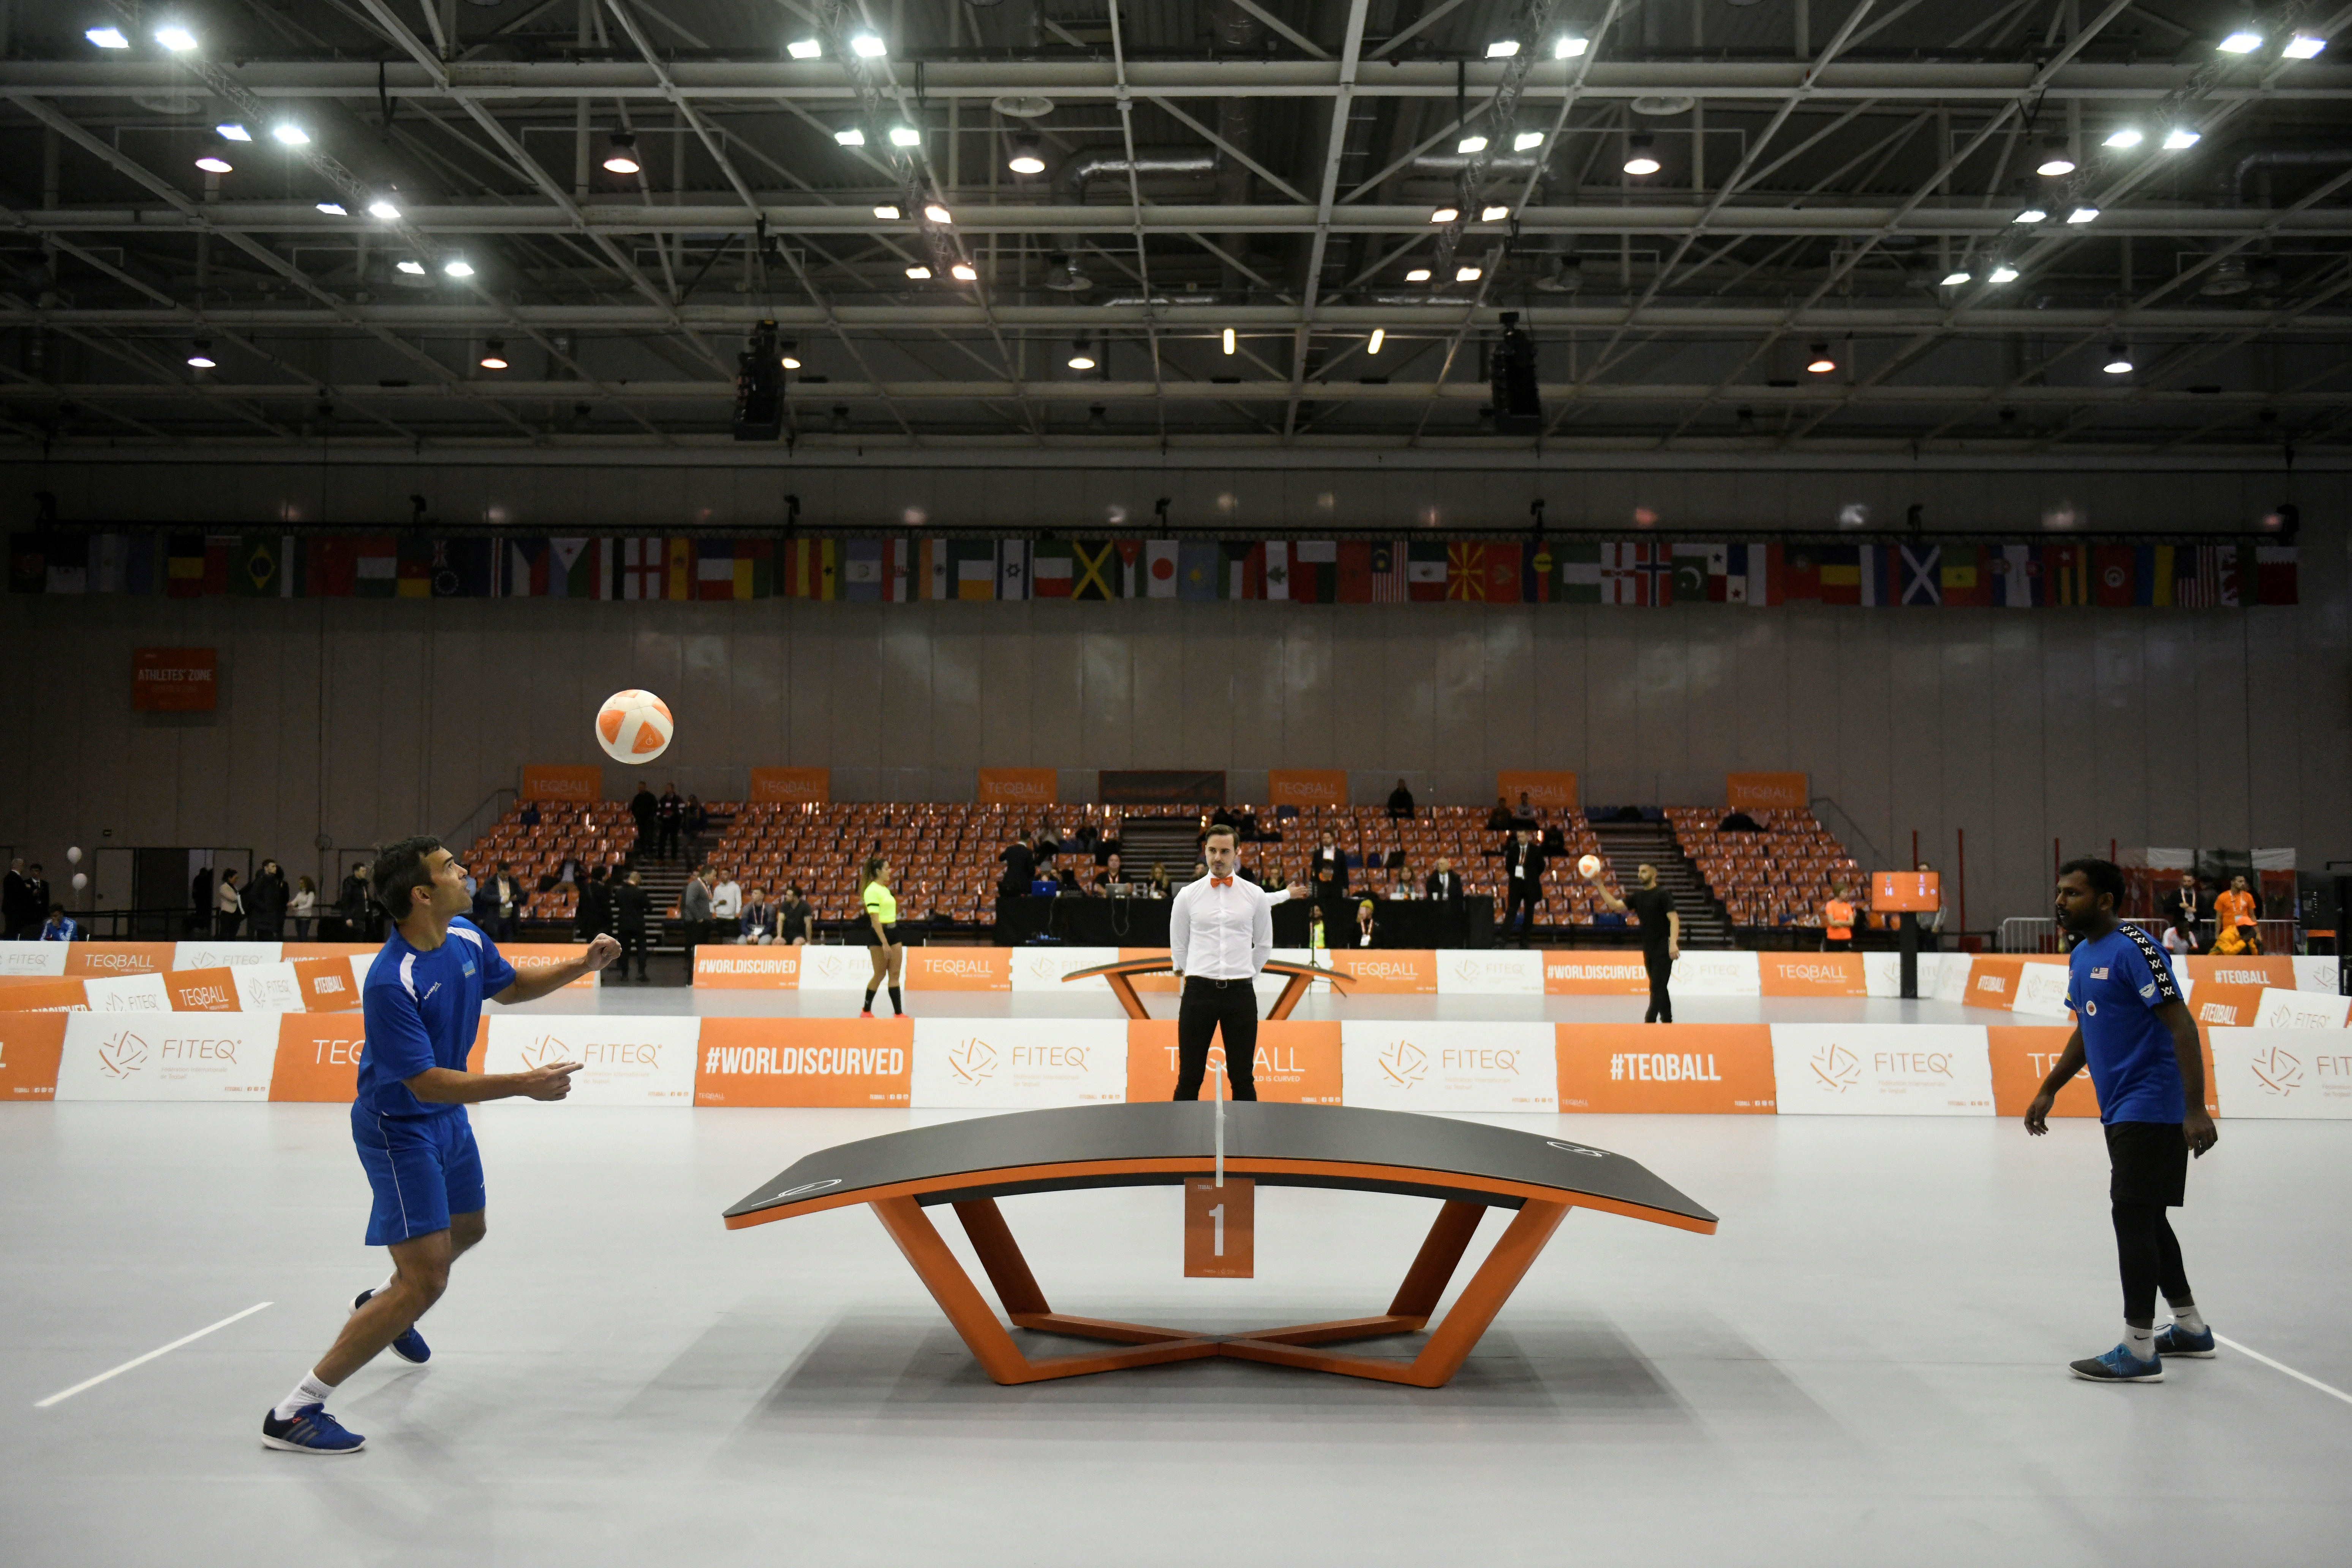 Future Olympic sport? Teqball continues their upward trajectory with a firm focus on the future